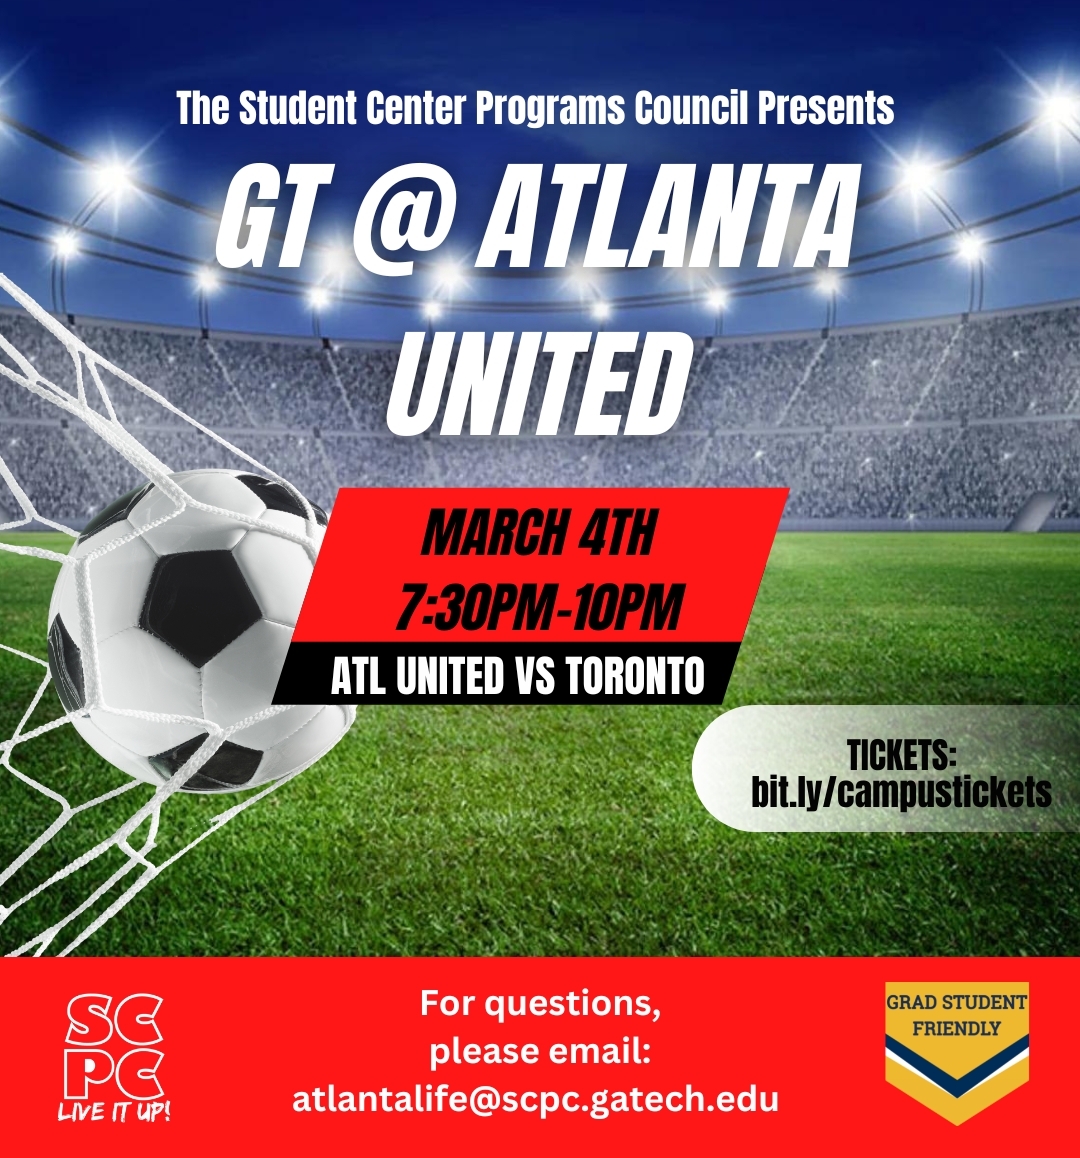 On Saturday, March 4th go to one of Atlanta's premier venues, Mercedes-Benz Stadium and watch Major League Soccer in action as Atlanta United play against the Toronto Football Club. Tickets are available for students for only $30! All tickets will be seated together in sections 228 and 229. Students should use Gate 1 to enter Mercedes-Benz Stadium. The game will begin at 7:30 p.m. and will last between 1.5 and 2 hours.
Game tickets are virtual, so tickets will be transferred to you before the game using the